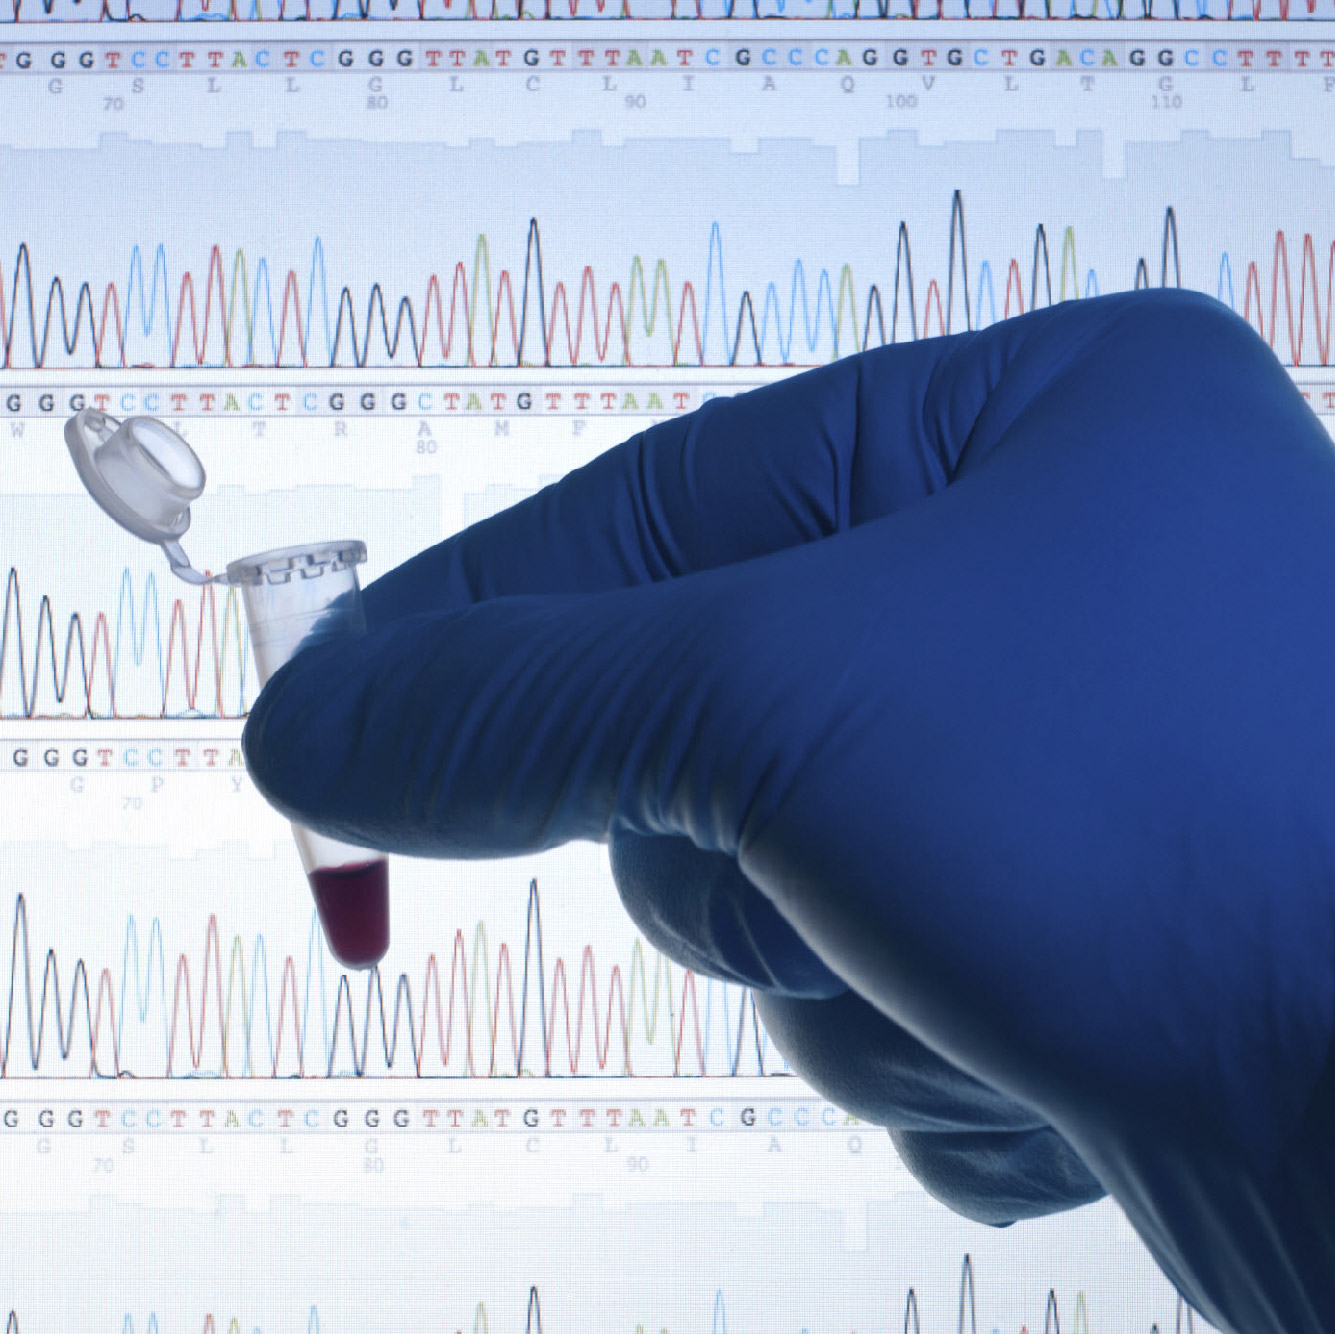 DNA sequence and physician holding tube of blood